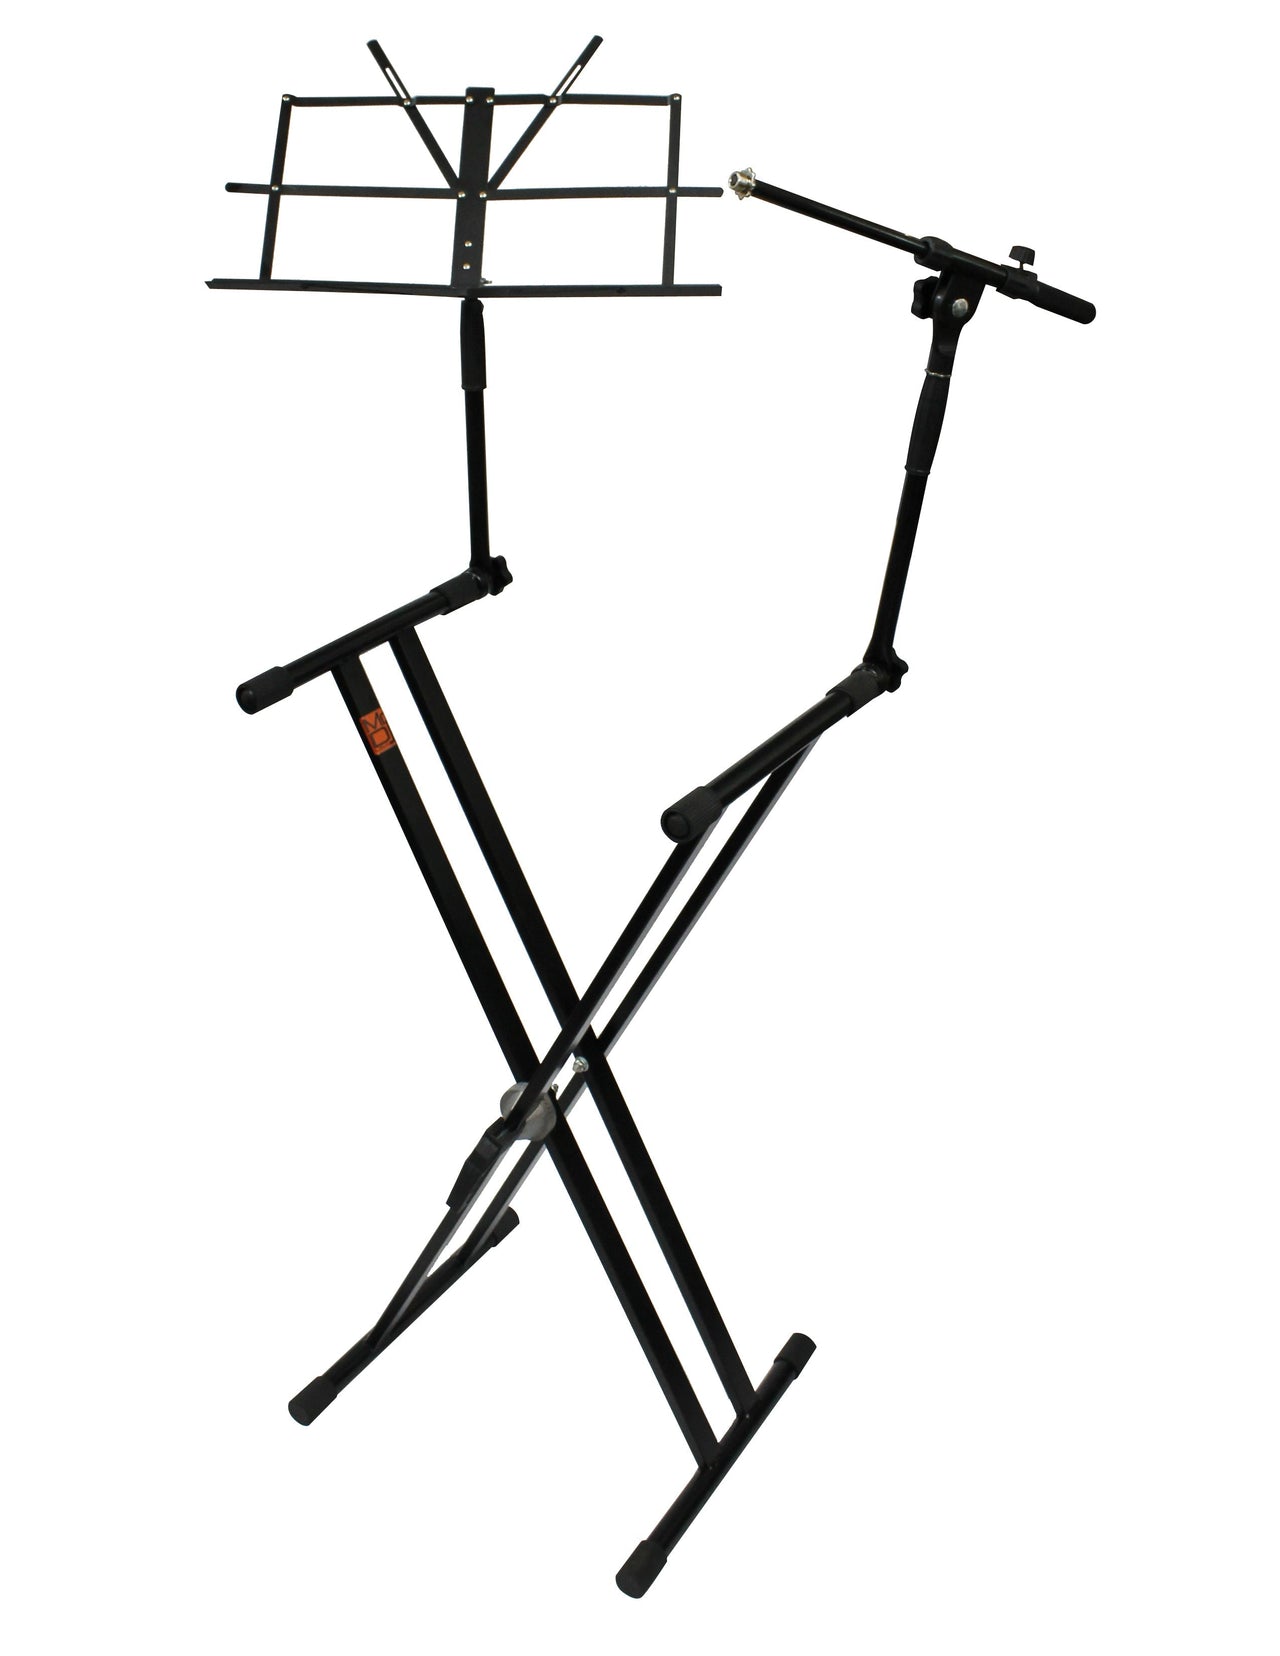 Mr Dj KS700 Key Board Stand with Music Note and Microphone Holder